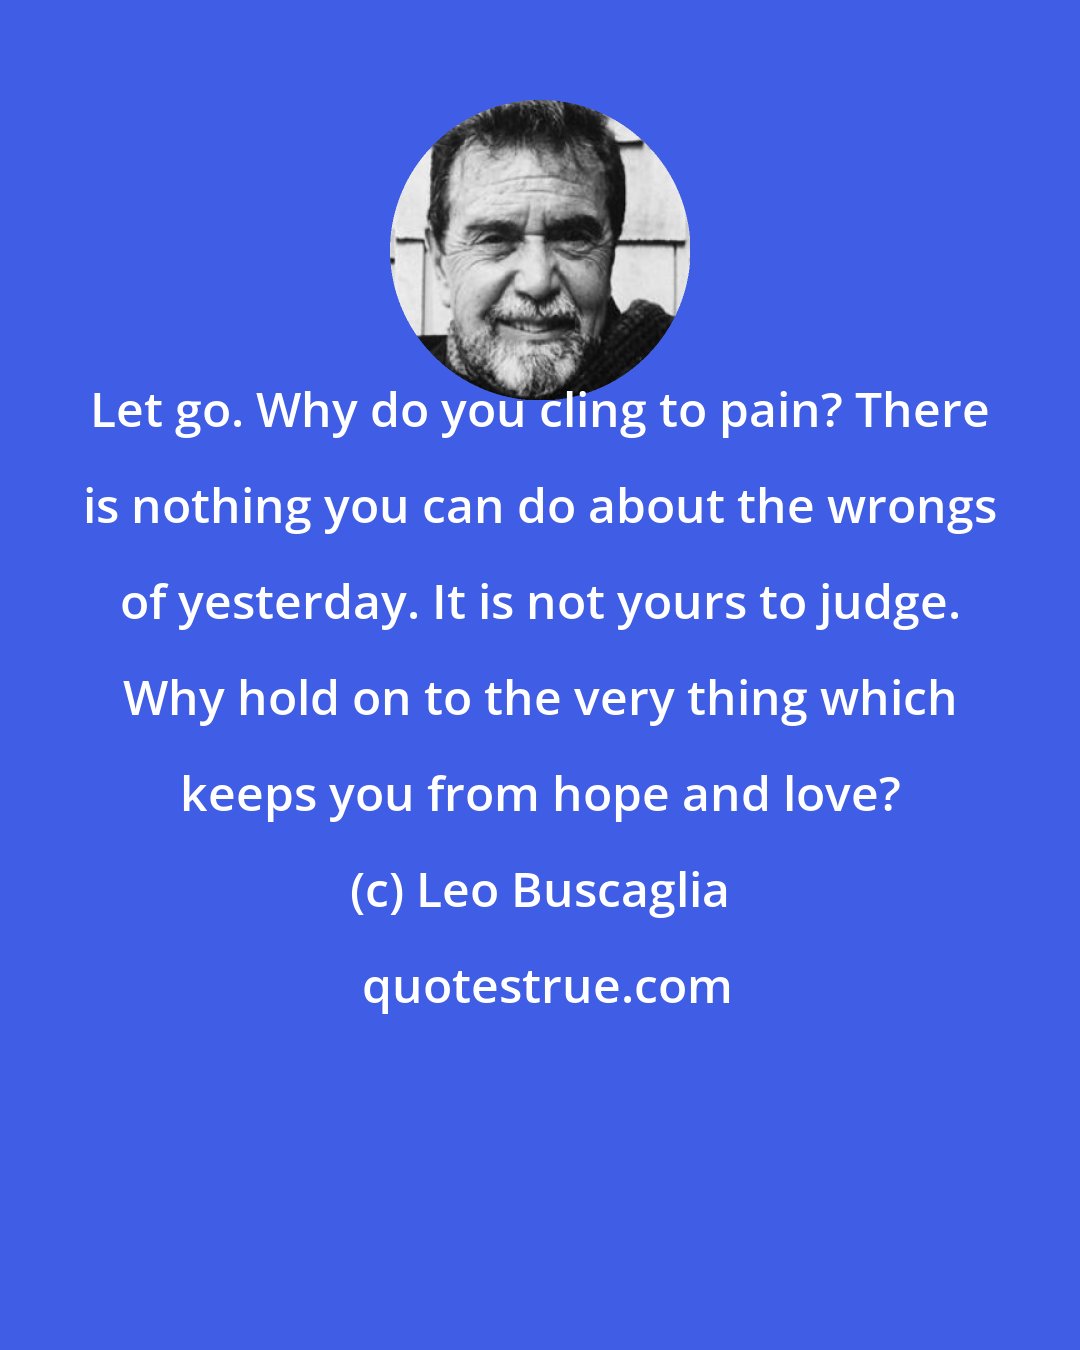 Leo Buscaglia: Let go. Why do you cling to pain? There is nothing you can do about the wrongs of yesterday. It is not yours to judge. Why hold on to the very thing which keeps you from hope and love?